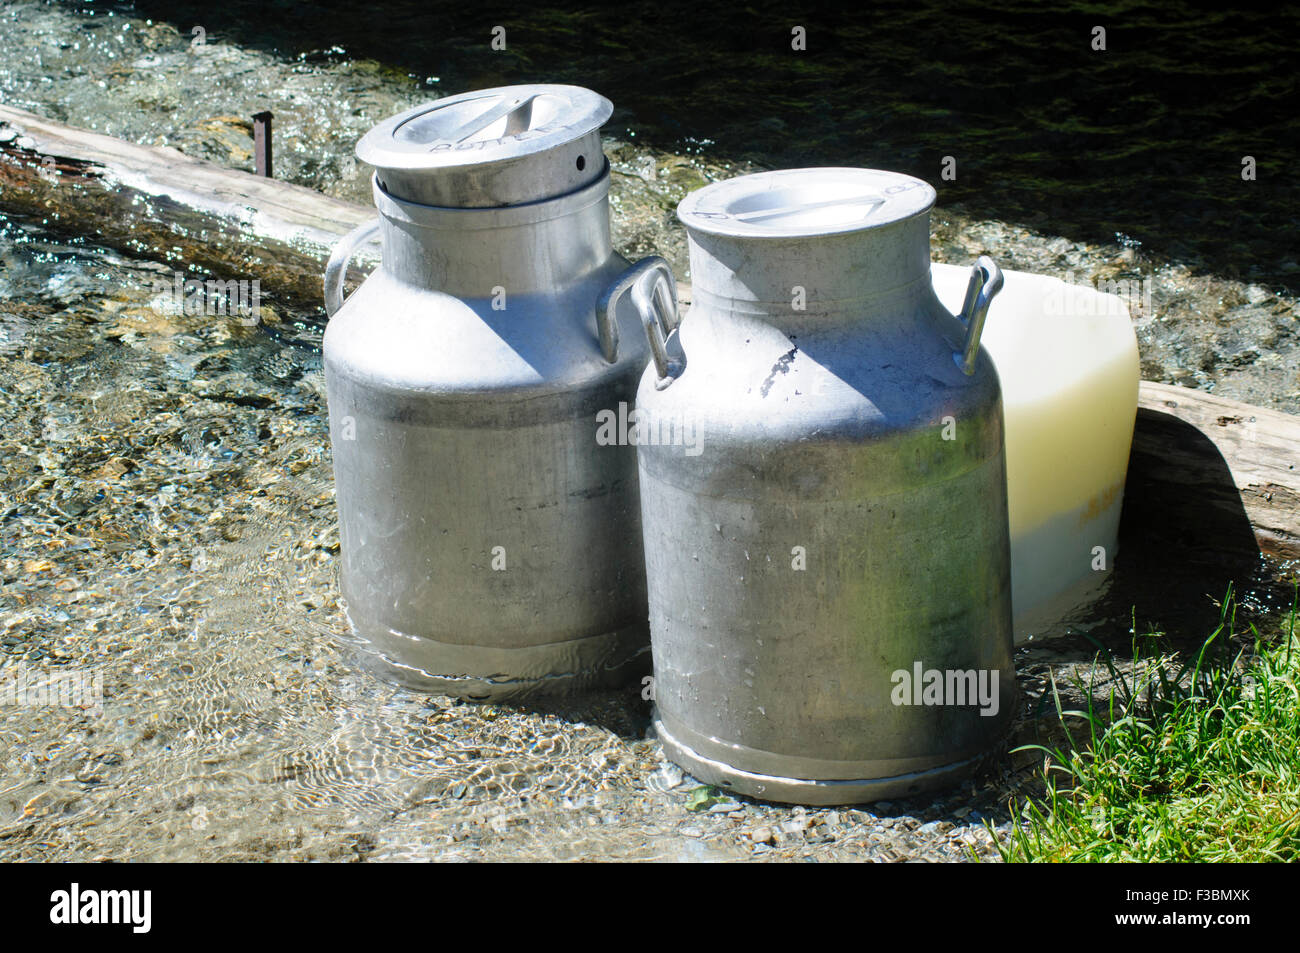 Metal Milk urns in dairy farm cooling in spring water. Photographed in Tirol, Austrial Stock Photo